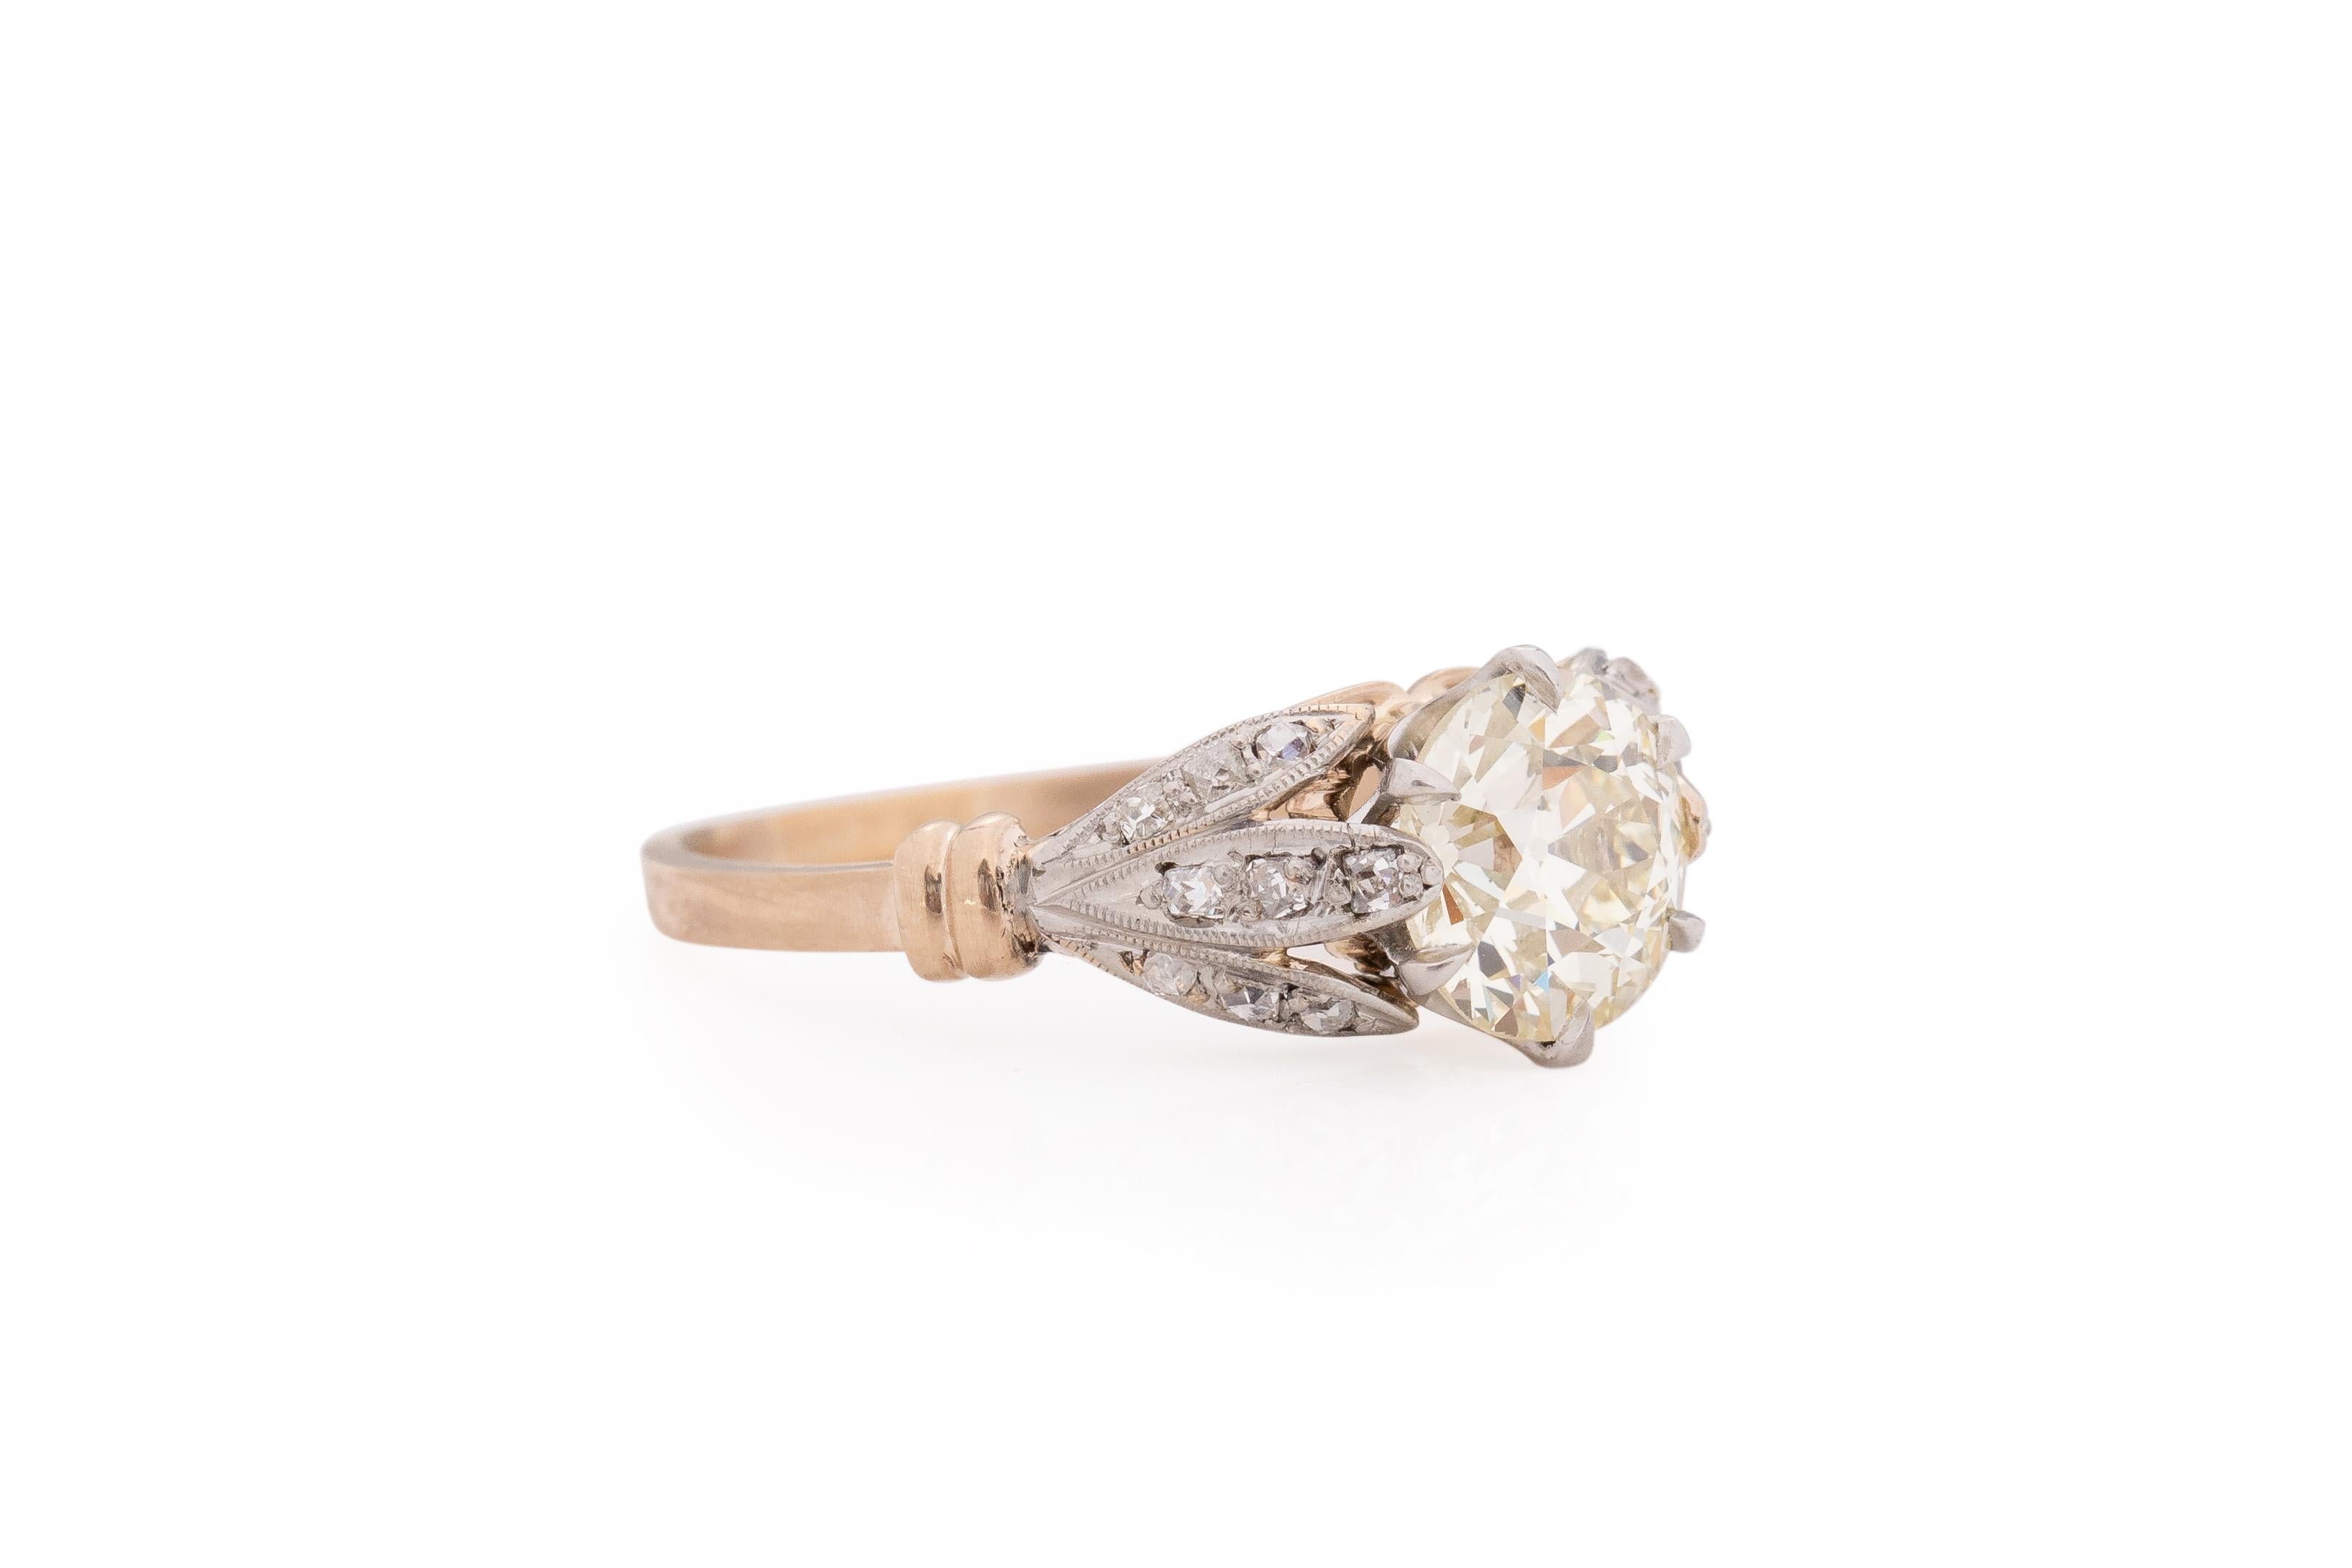 Ring Size: 8.25
Metal Type: 14 Karat Yellow Gold & Platinum Head [Hallmarked, and Tested]
Weight: 3.9 grams

Center Diamond Details:
GIA REPORT #: 1216603506
Weight: 1.94 carat
Cut: Old European brilliant
Color: Light Yellow (Q/R)
Clarity: